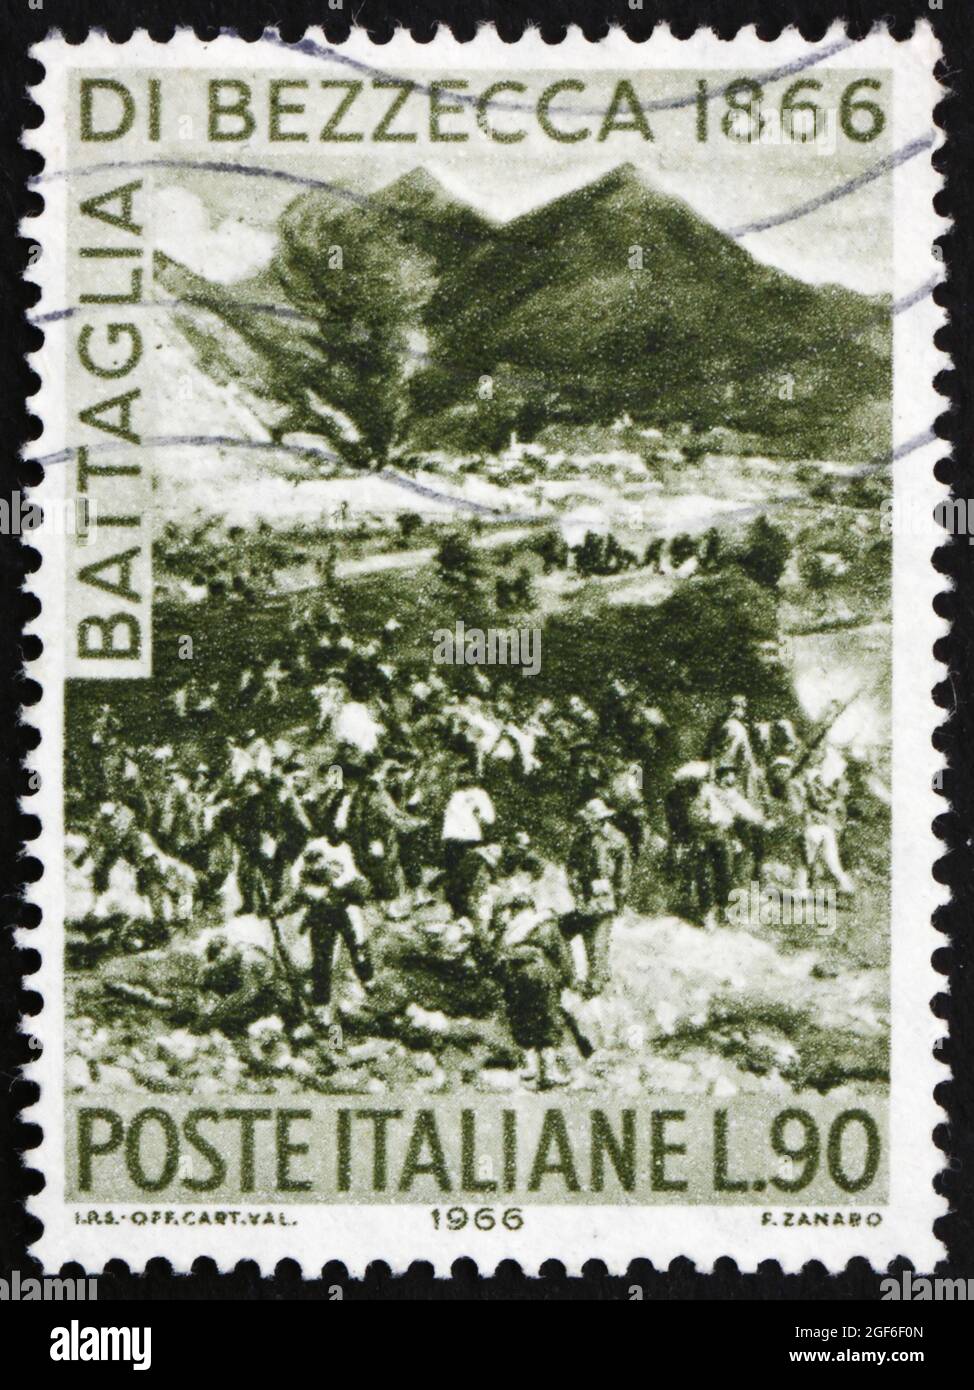 ITALY - CIRCA 1966: a stamp printed in the Italy shows Battle of Bezzecca, Centenary of the Unification of Italy and of the Battle of Bezzecca, circa Stock Photo